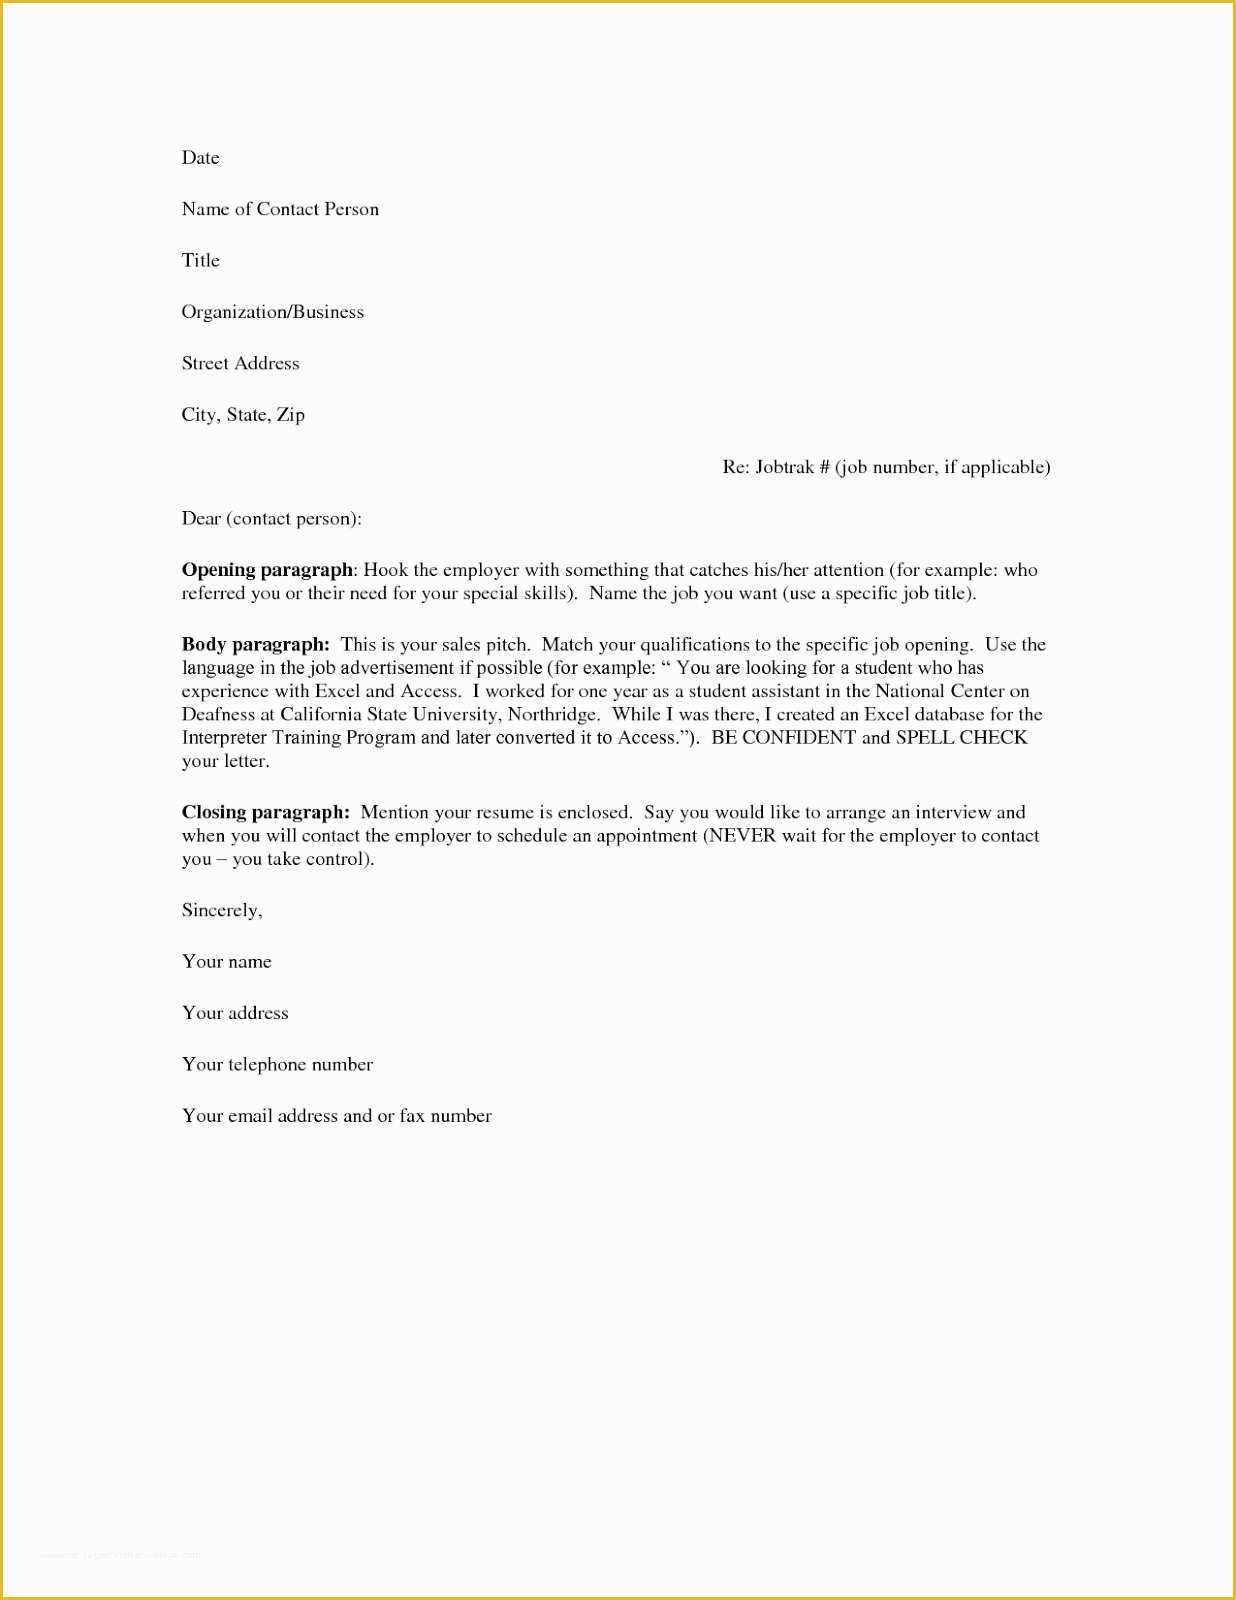 Free Resume and Cover Letter Templates Of Free Cover Letter Samples for Resumes